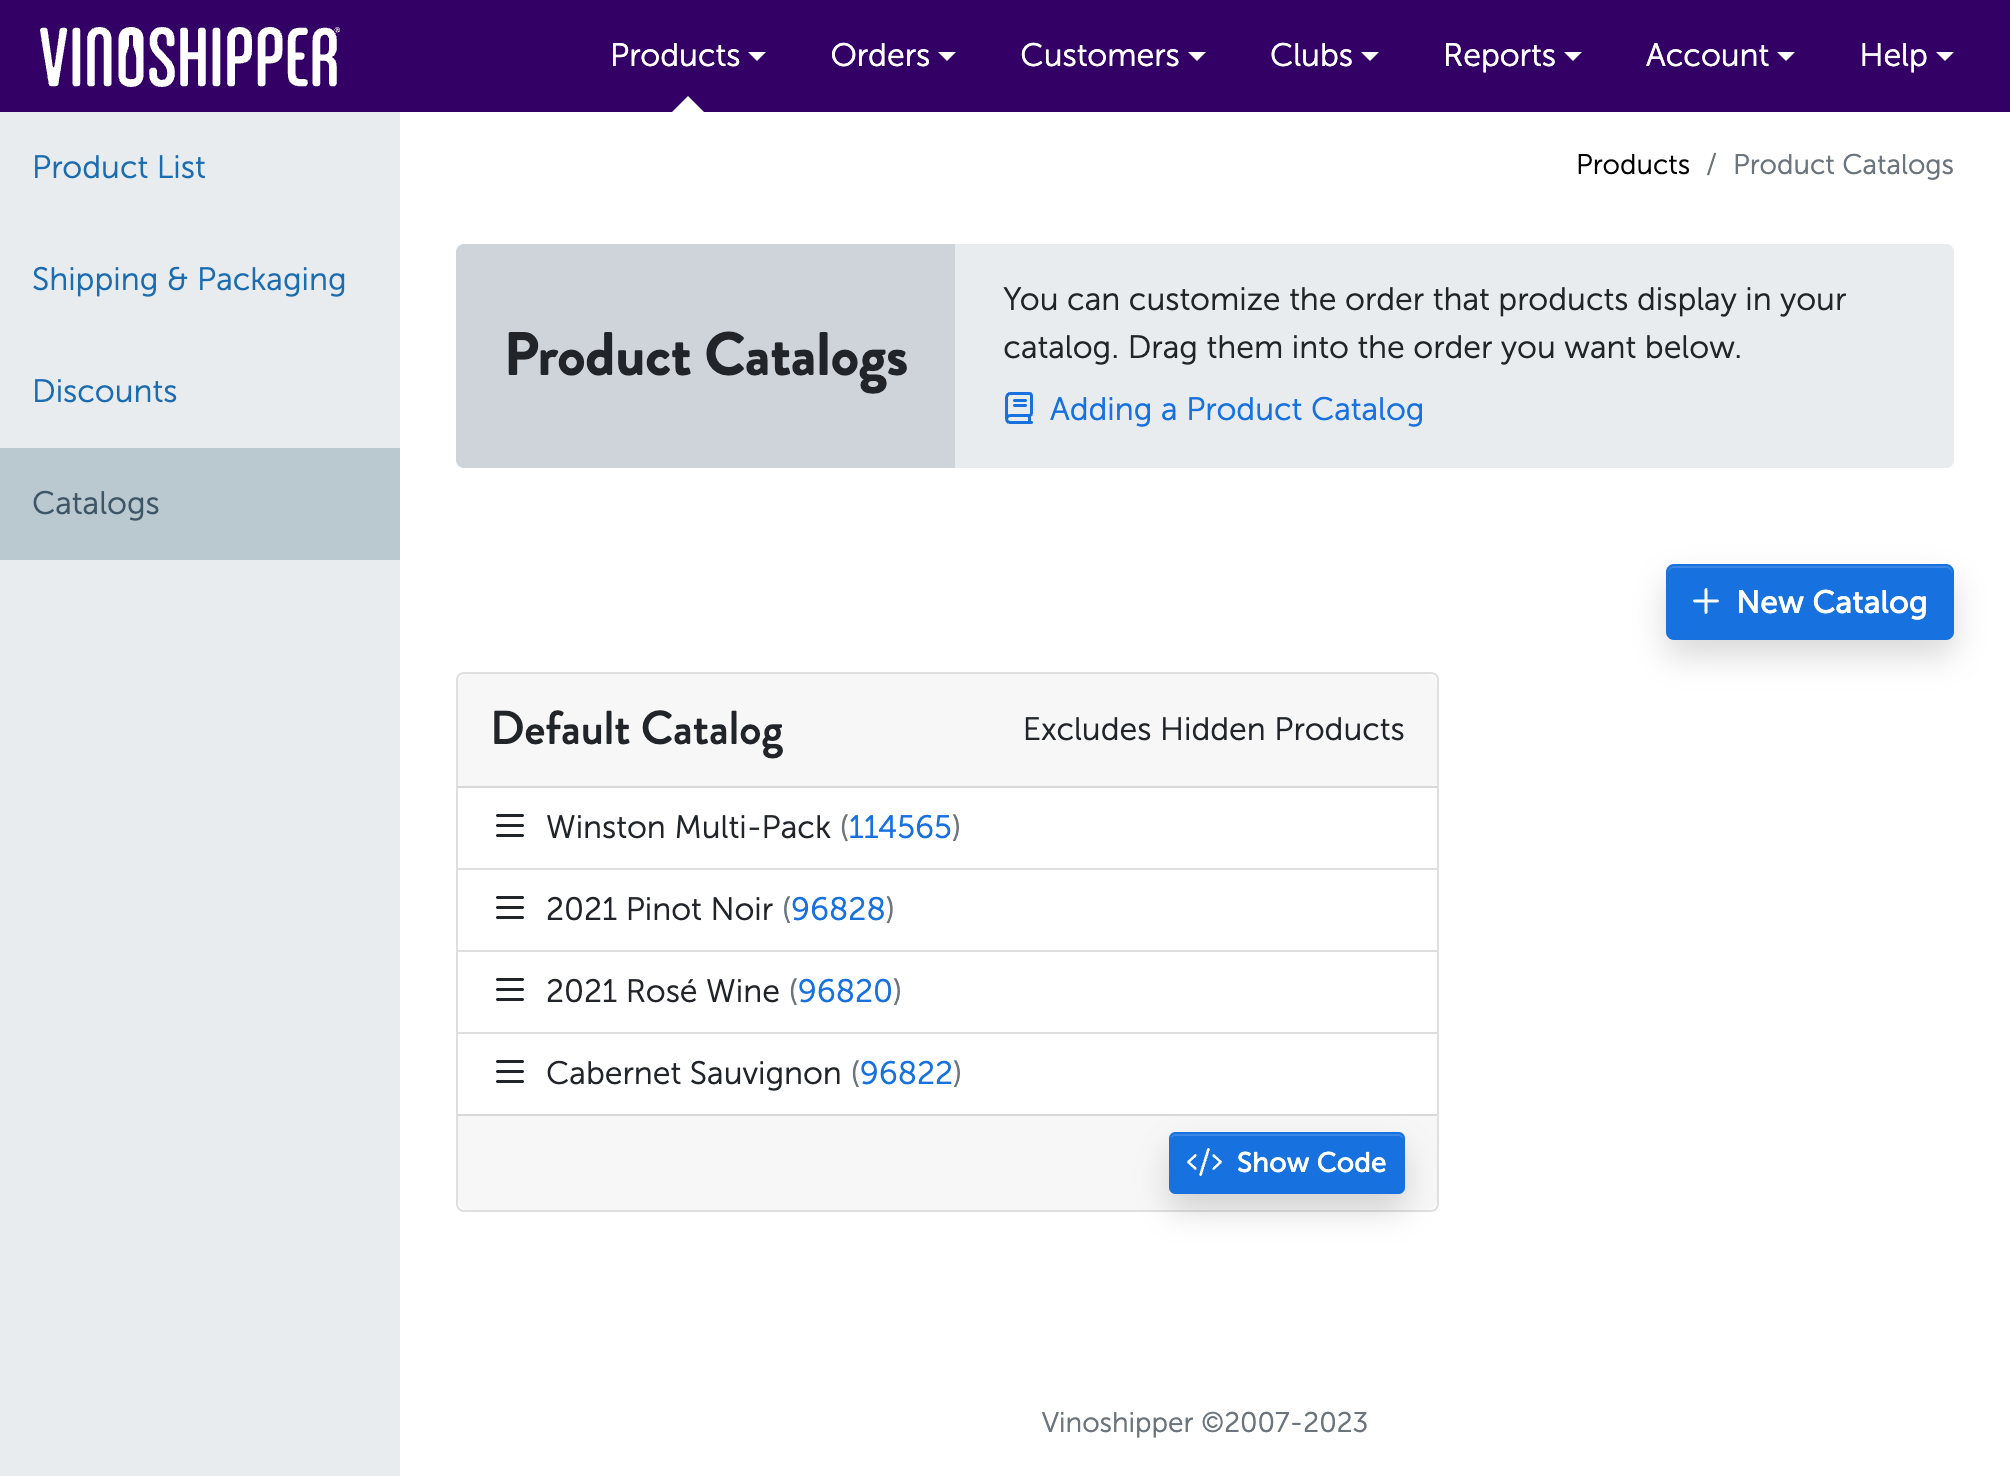 Sample view of the Producer's Product Catalog Admin